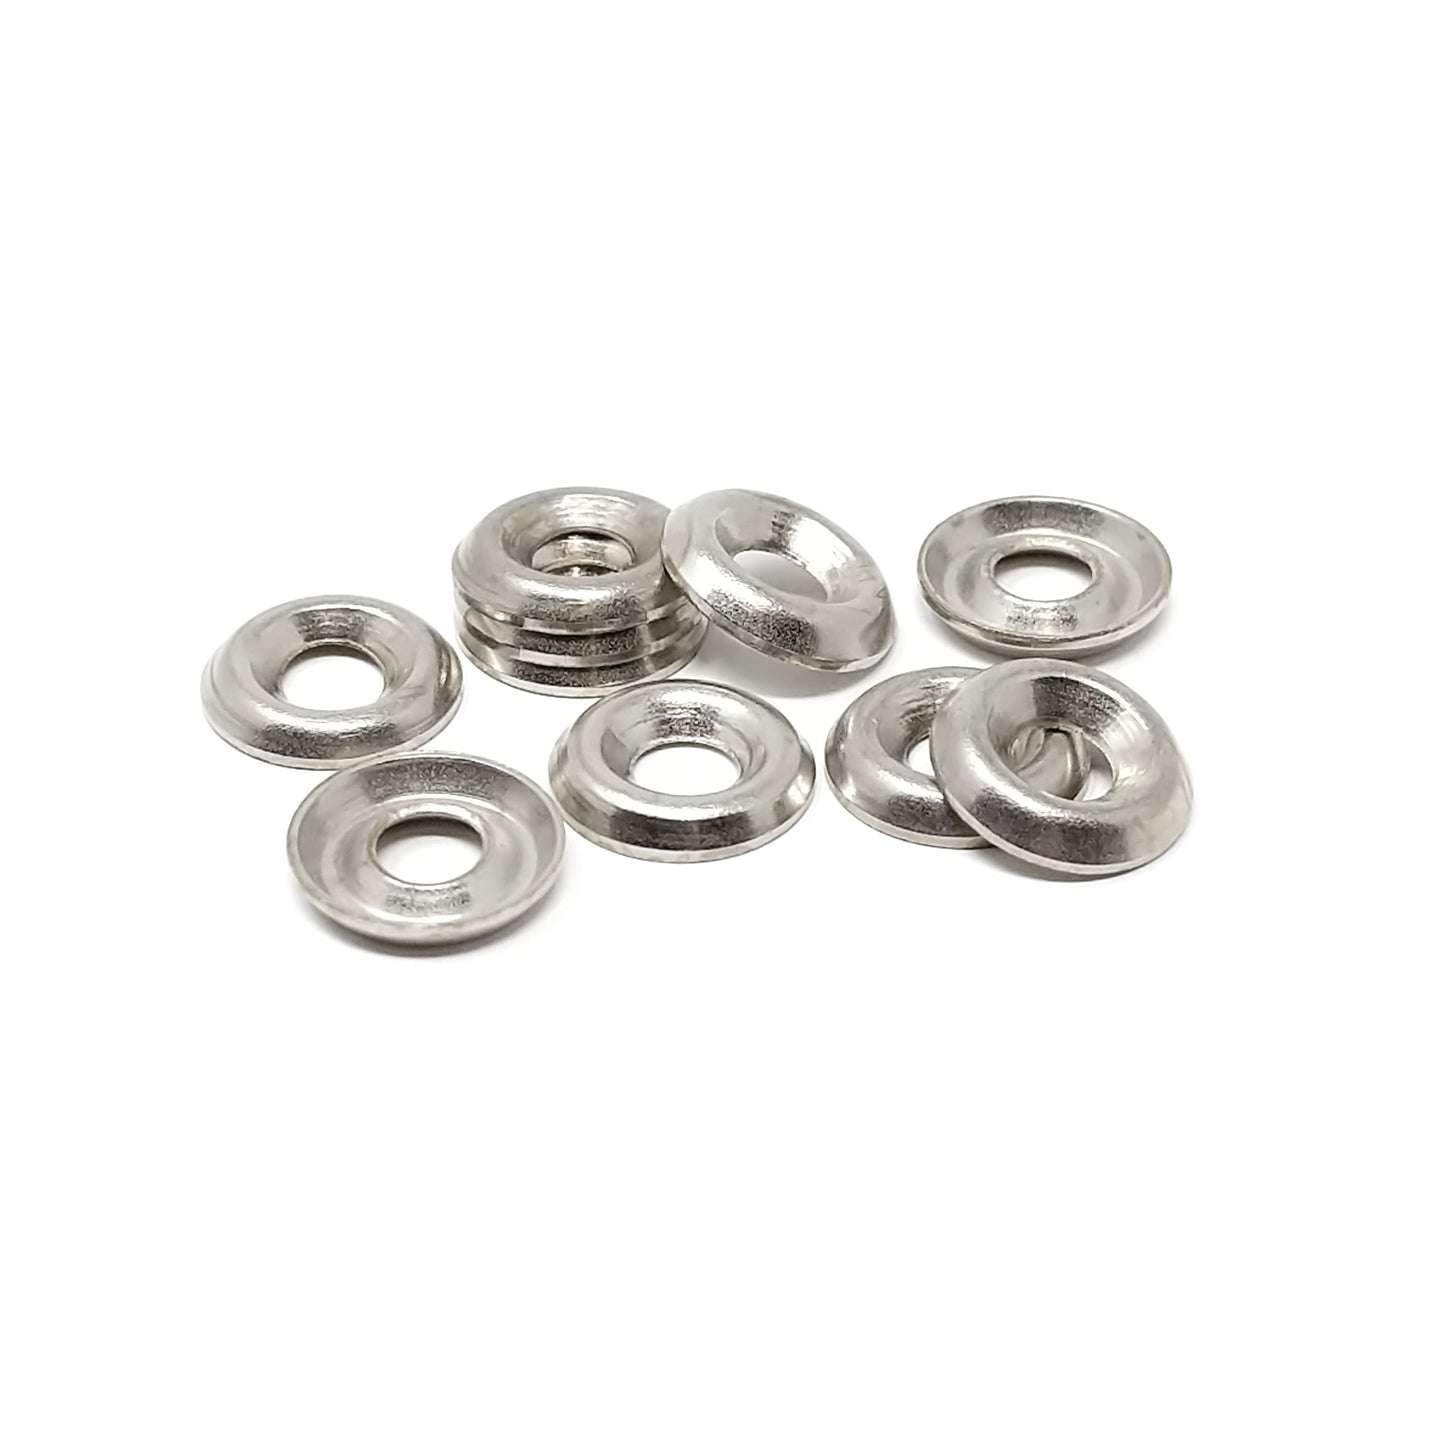 3.9mm Rosette Washers For Screws - Nickel Plated Steel, Made In Germany - Keay Vital Parts